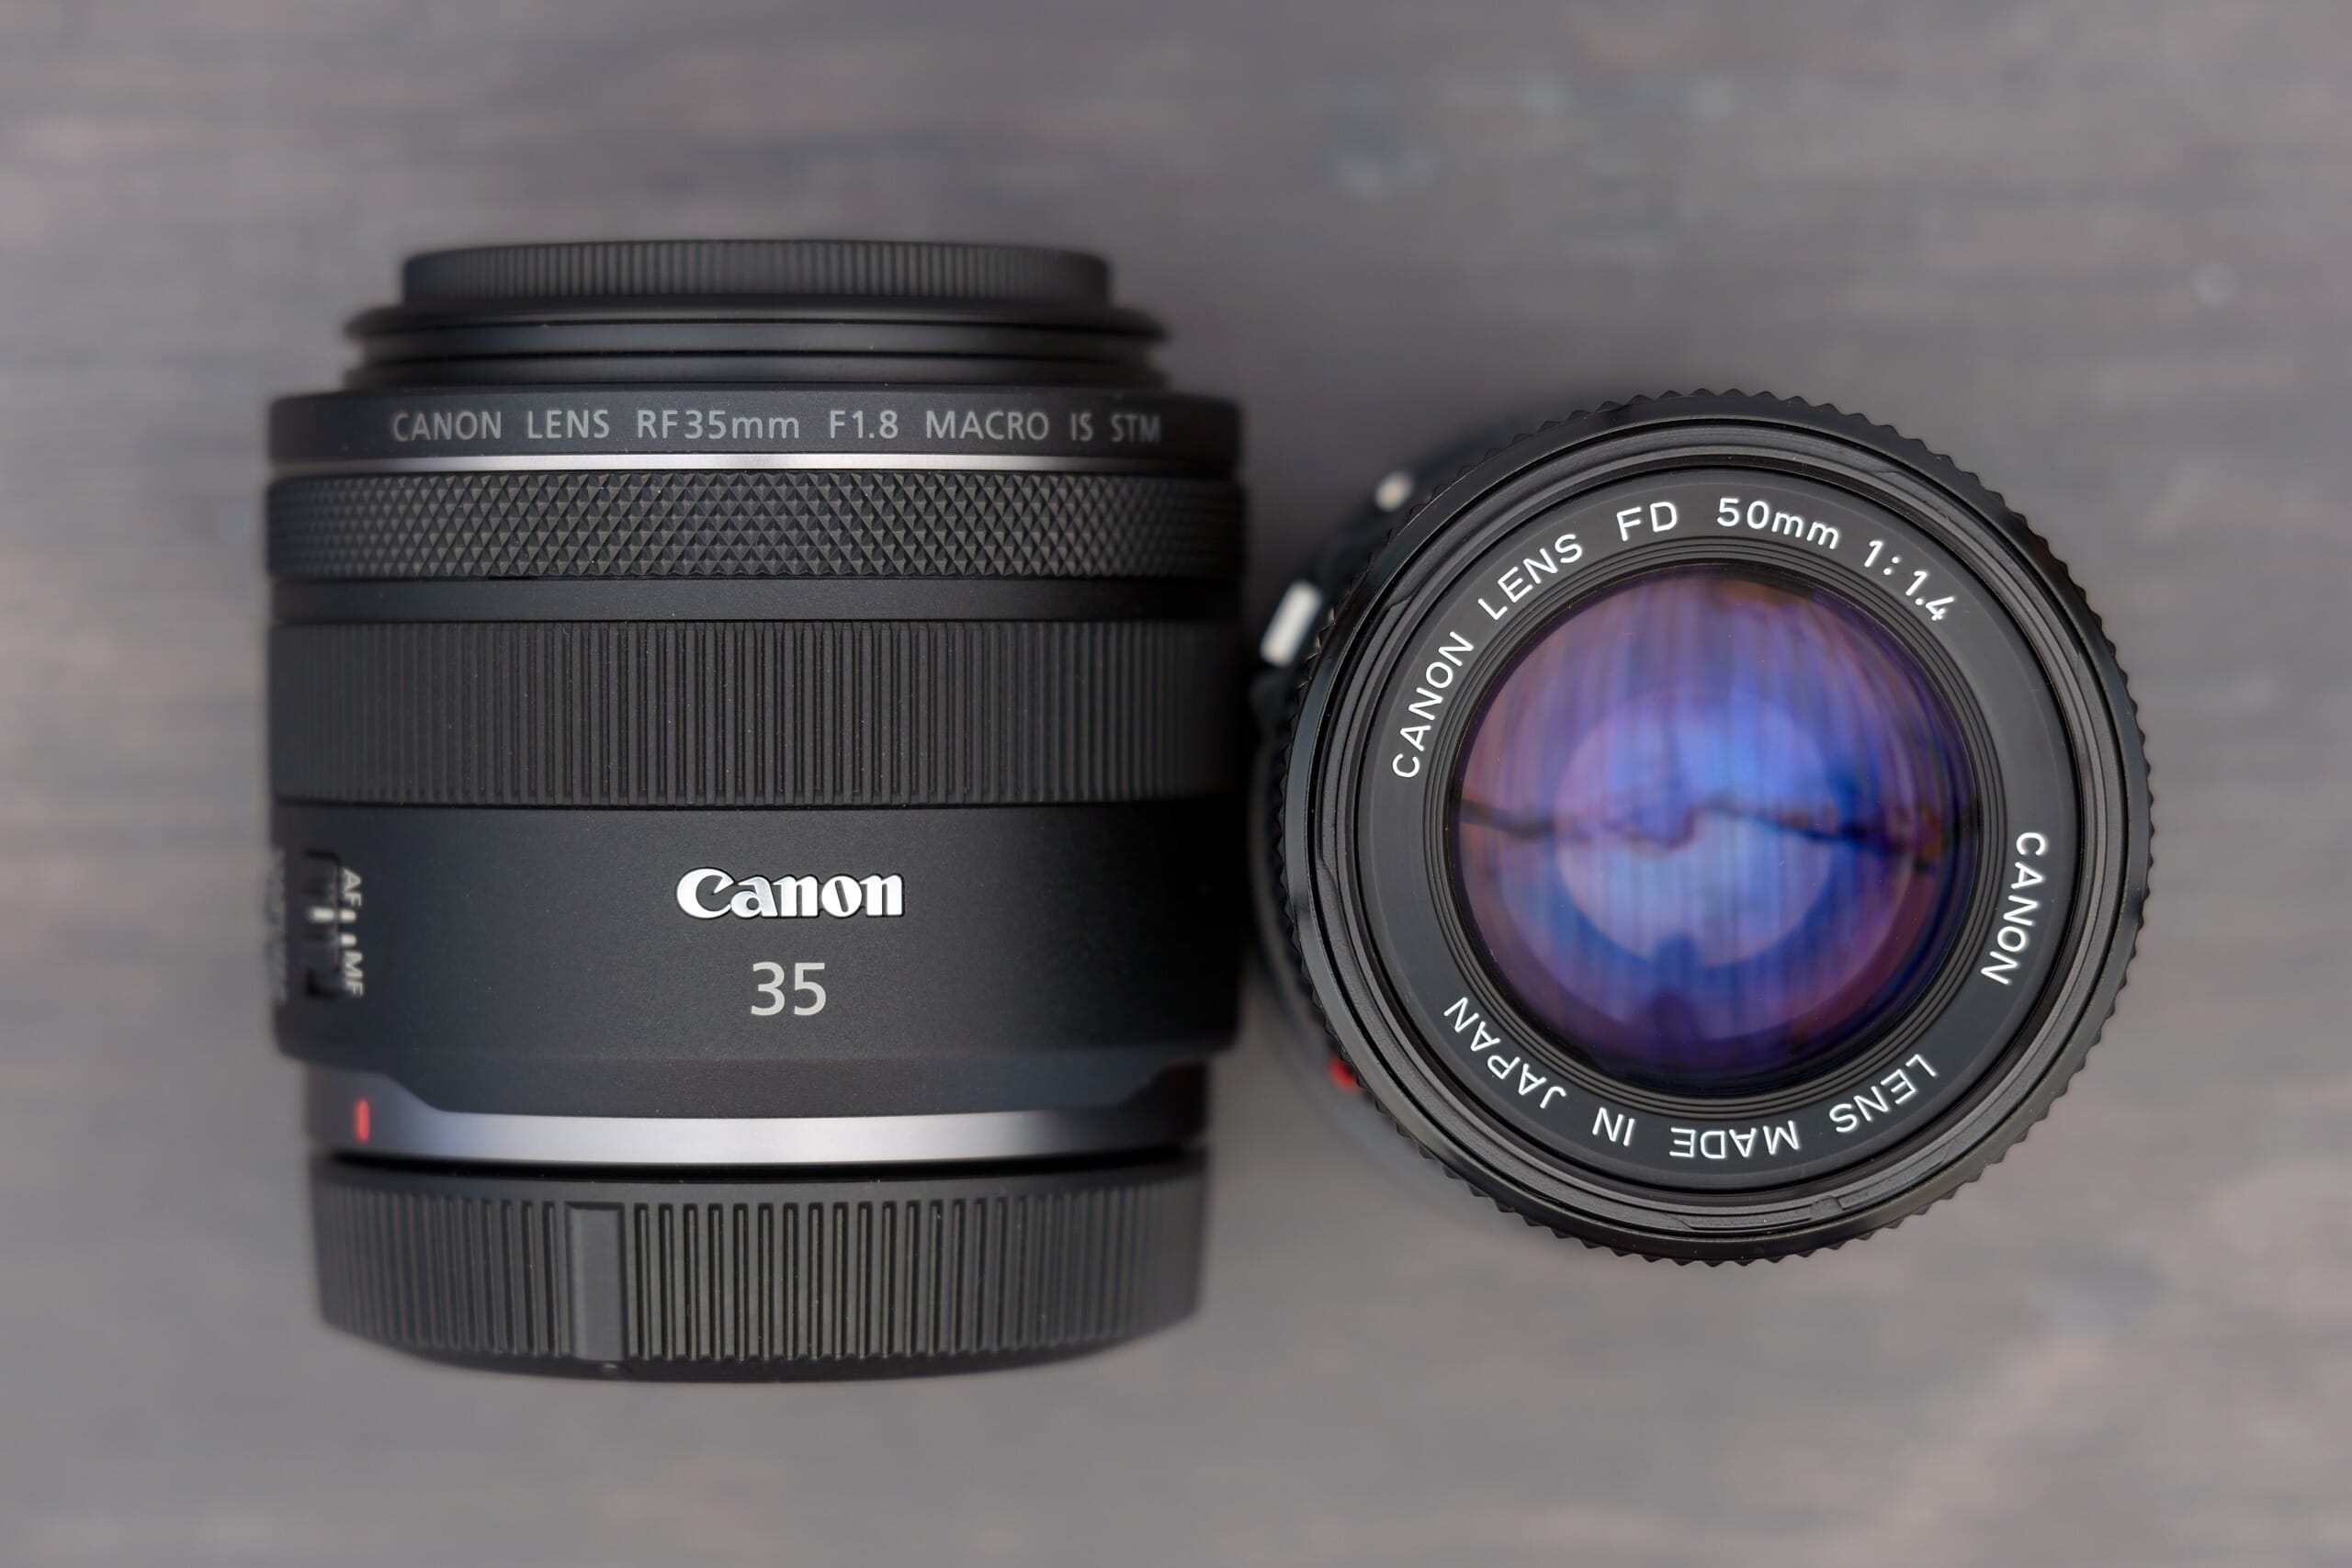 35mm vs 50mm: Which Prime Lens Should You Buy?